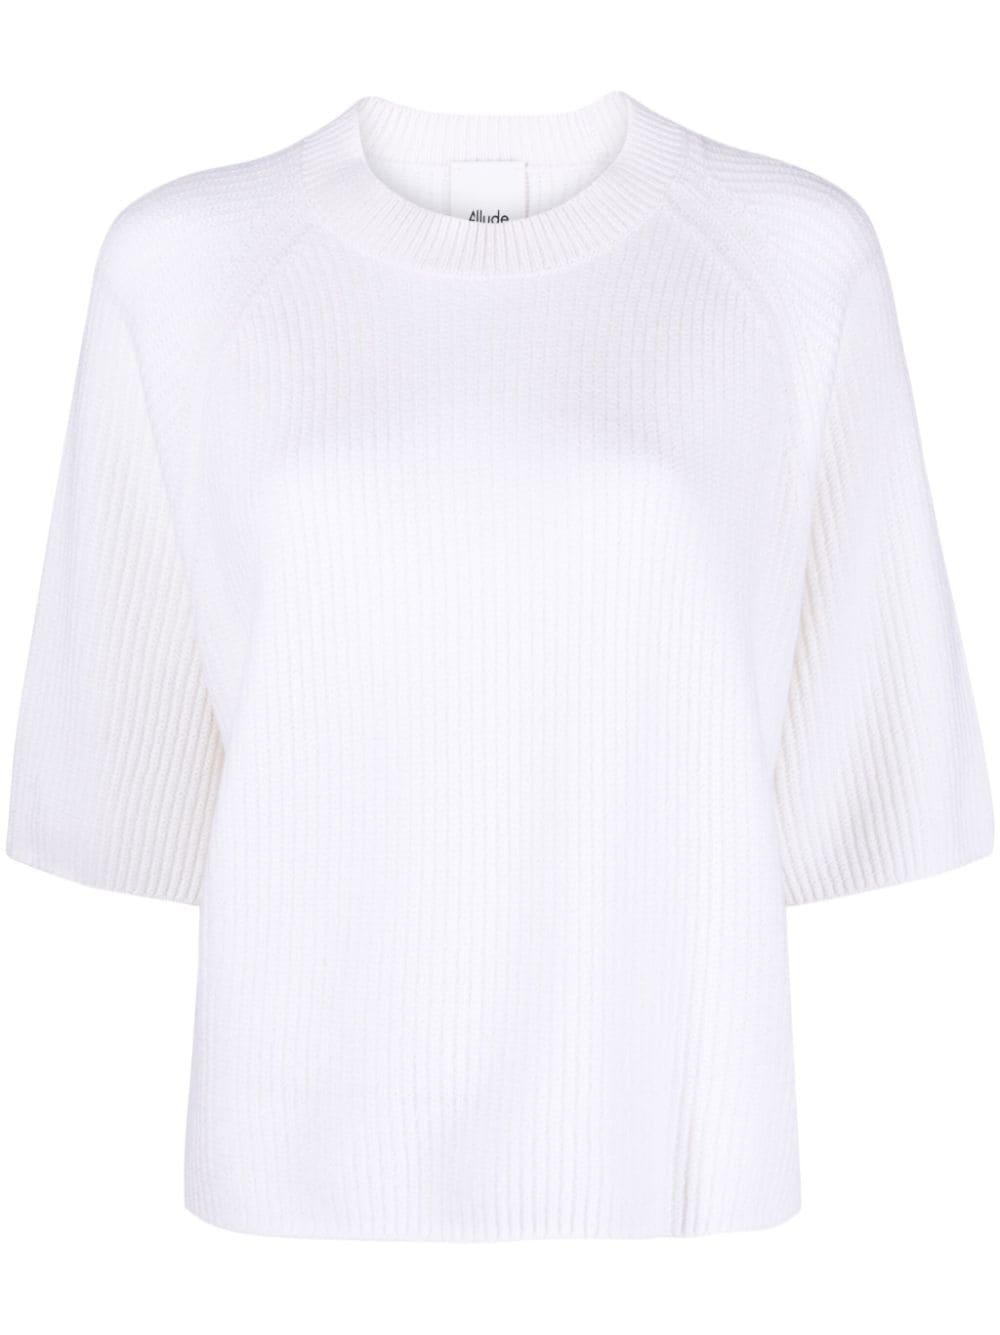 ALLUDE HALF-LENGTH SLEEVE RIBBED CASHMERE JUMPER